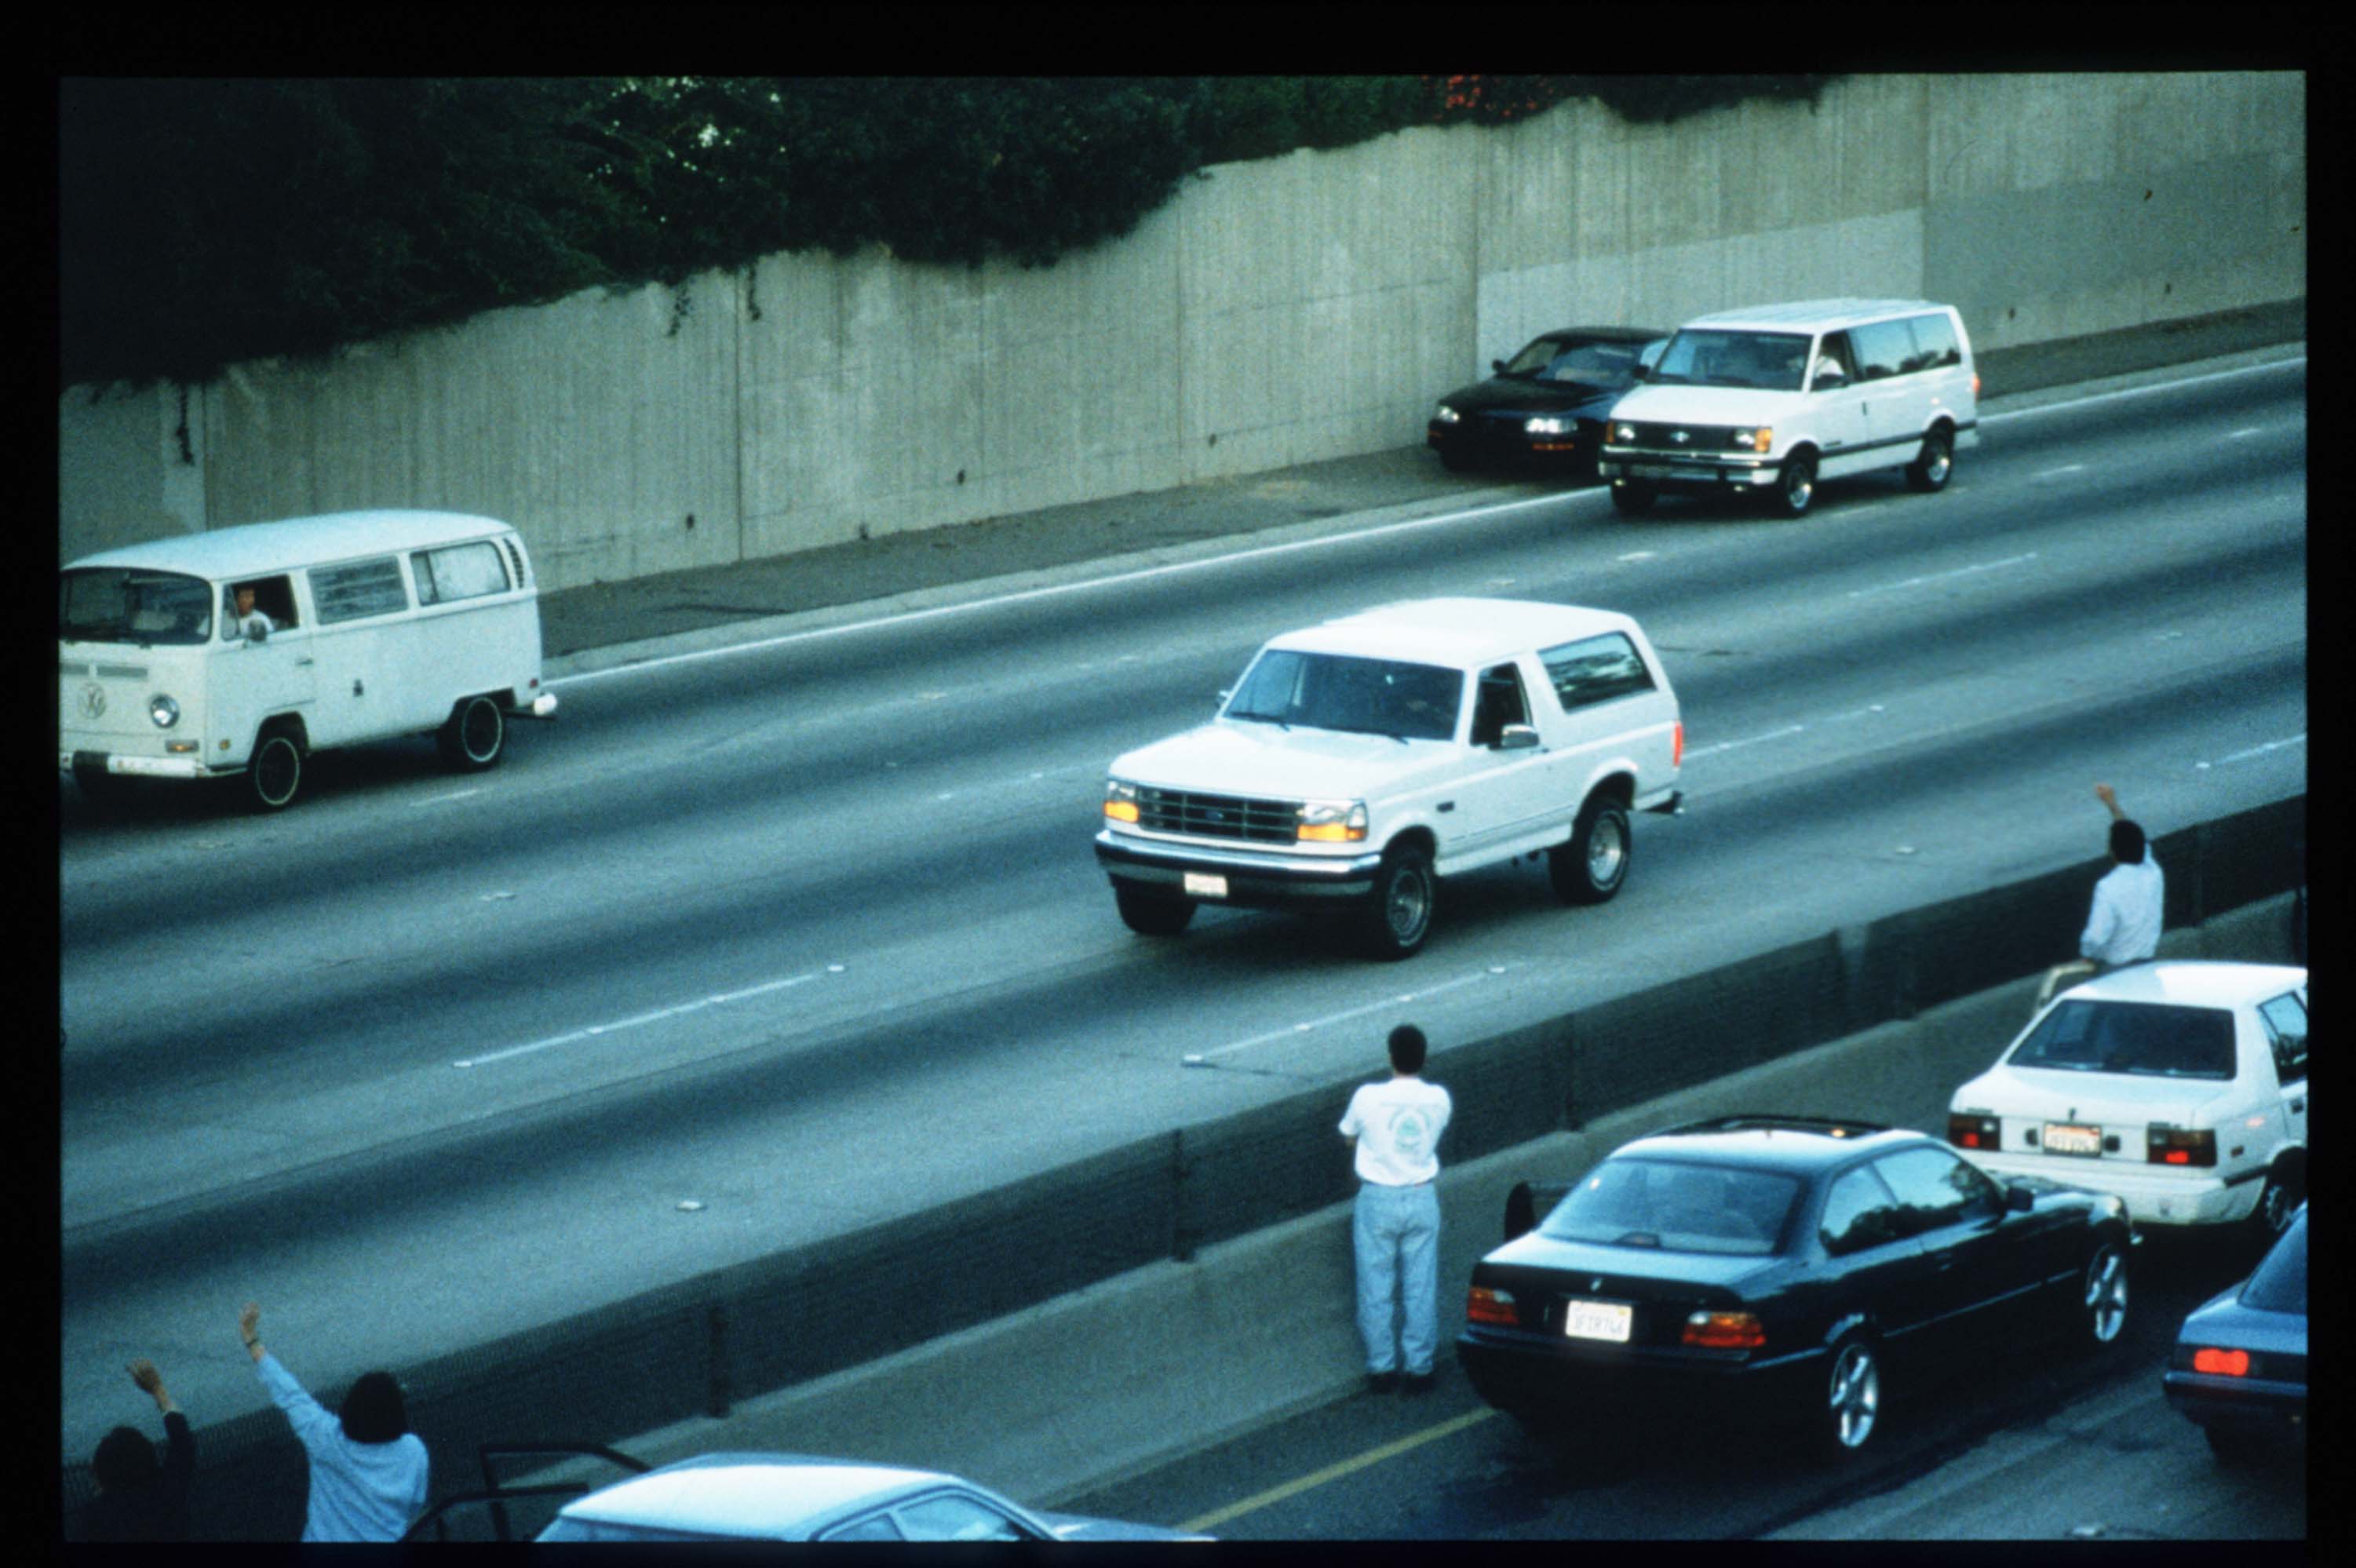 Motorists wave as police cars pursue the Ford Bronco (white, R) driven by Al Cowlings, carrying fugitive murder suspect O.J. Simpson, on a 90-minute slow-speed car chase June 17, 1994